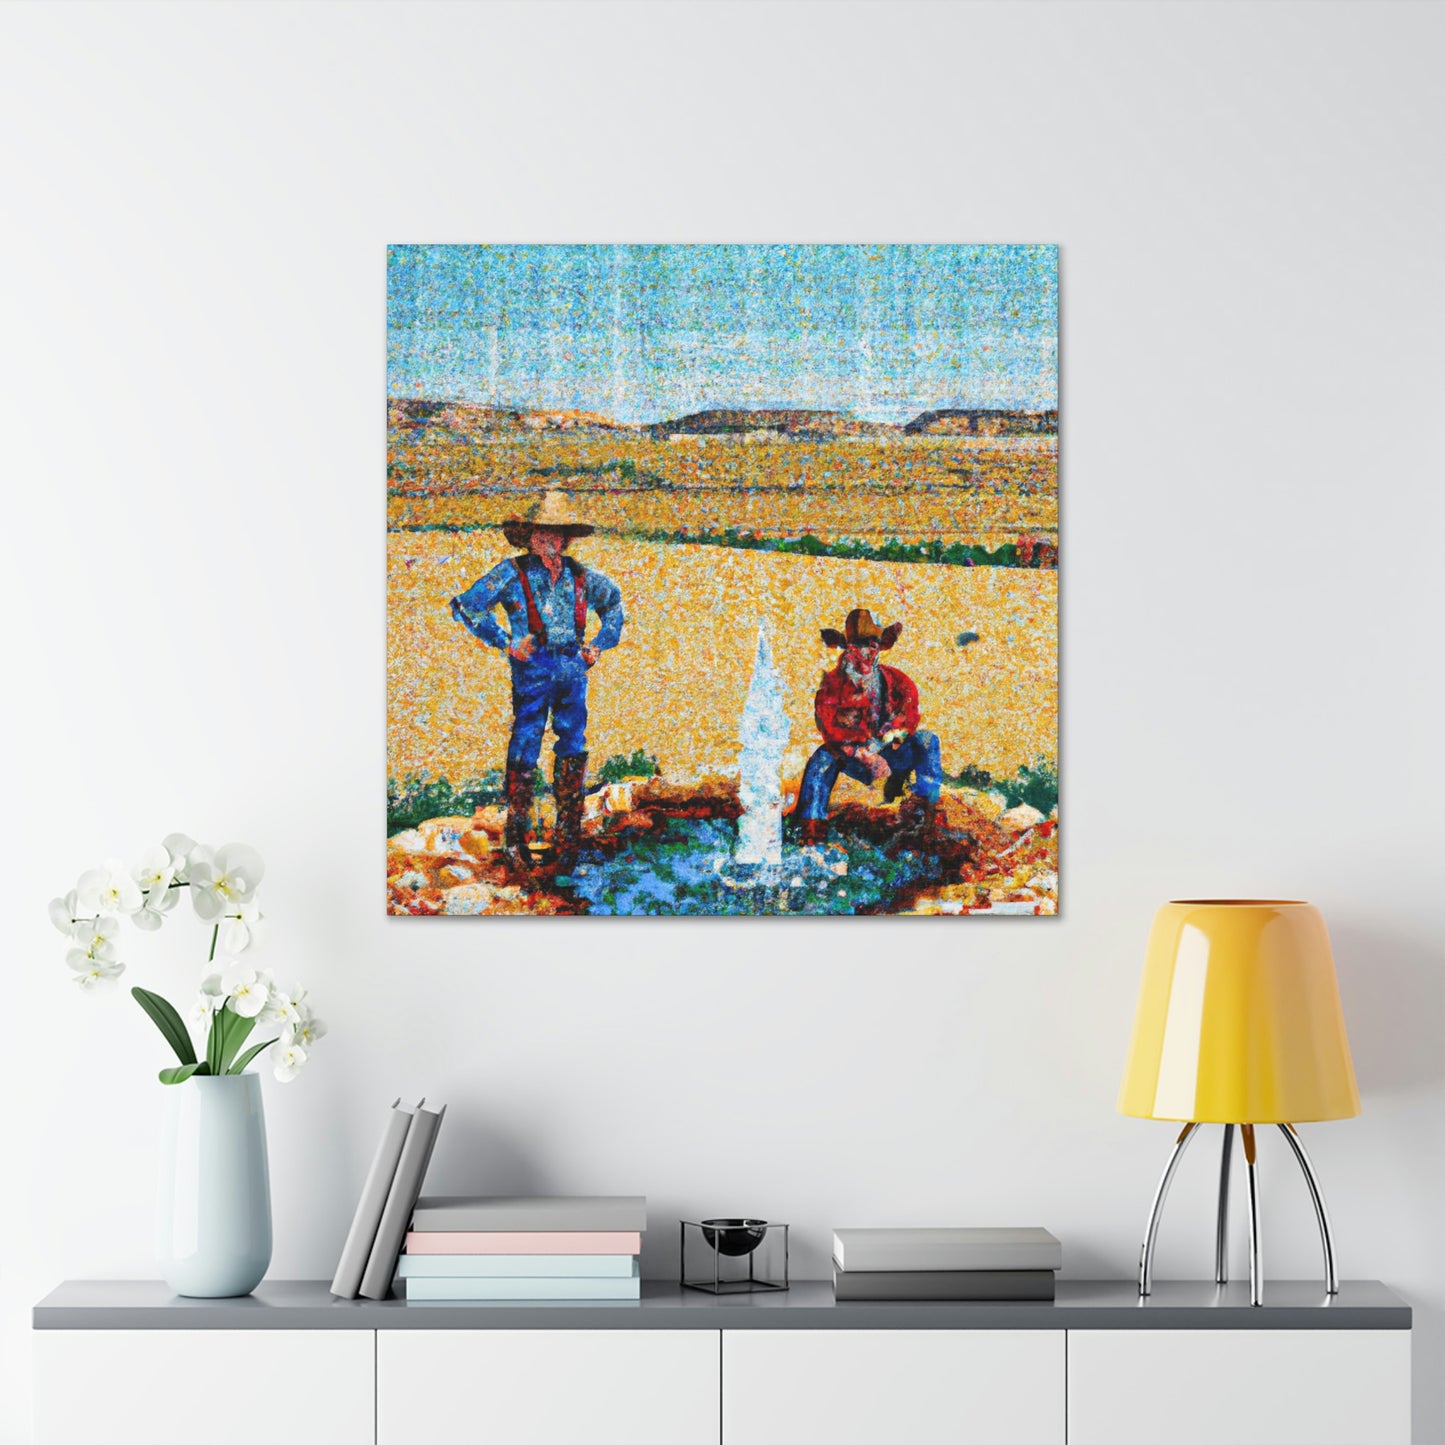 Water Trough Reflection - Canvas